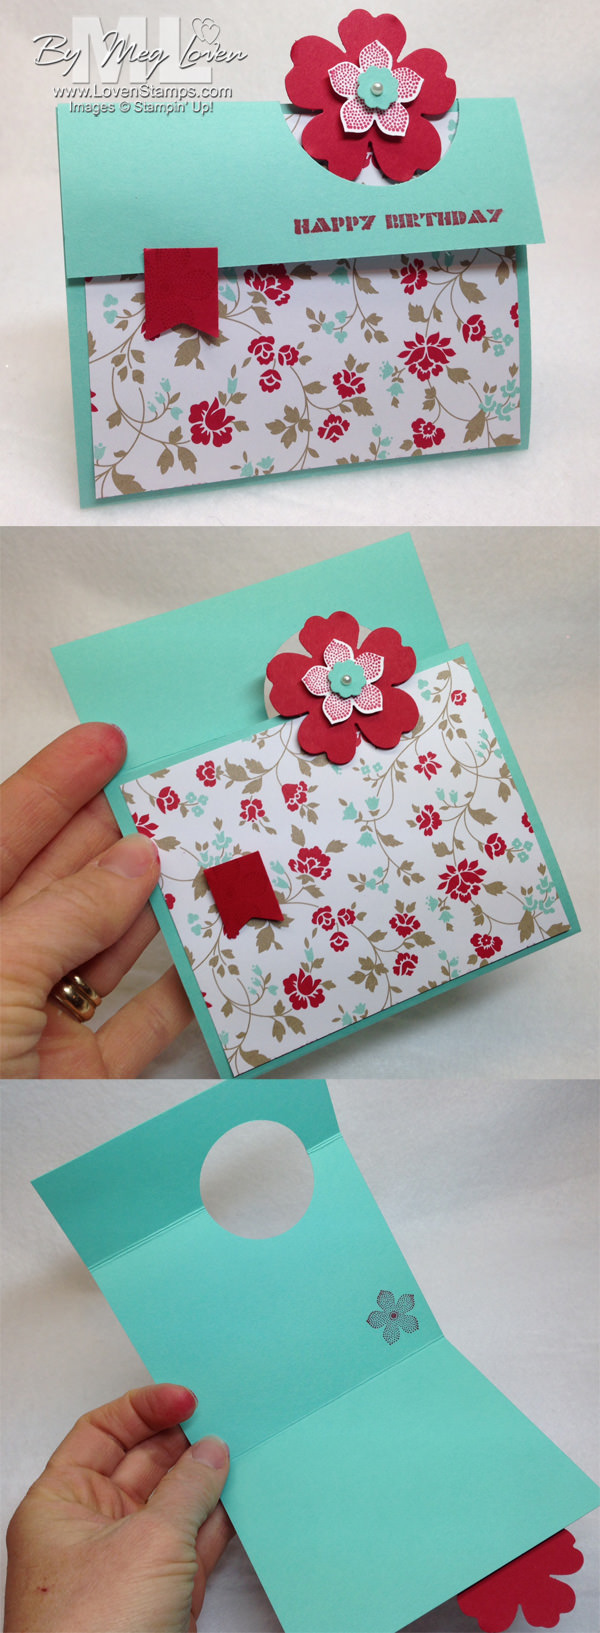 Peek A Boo Card Video Tutorial: Petite Petals & the Fresh Prints Designer Series Paper Stack, by LovenStamps